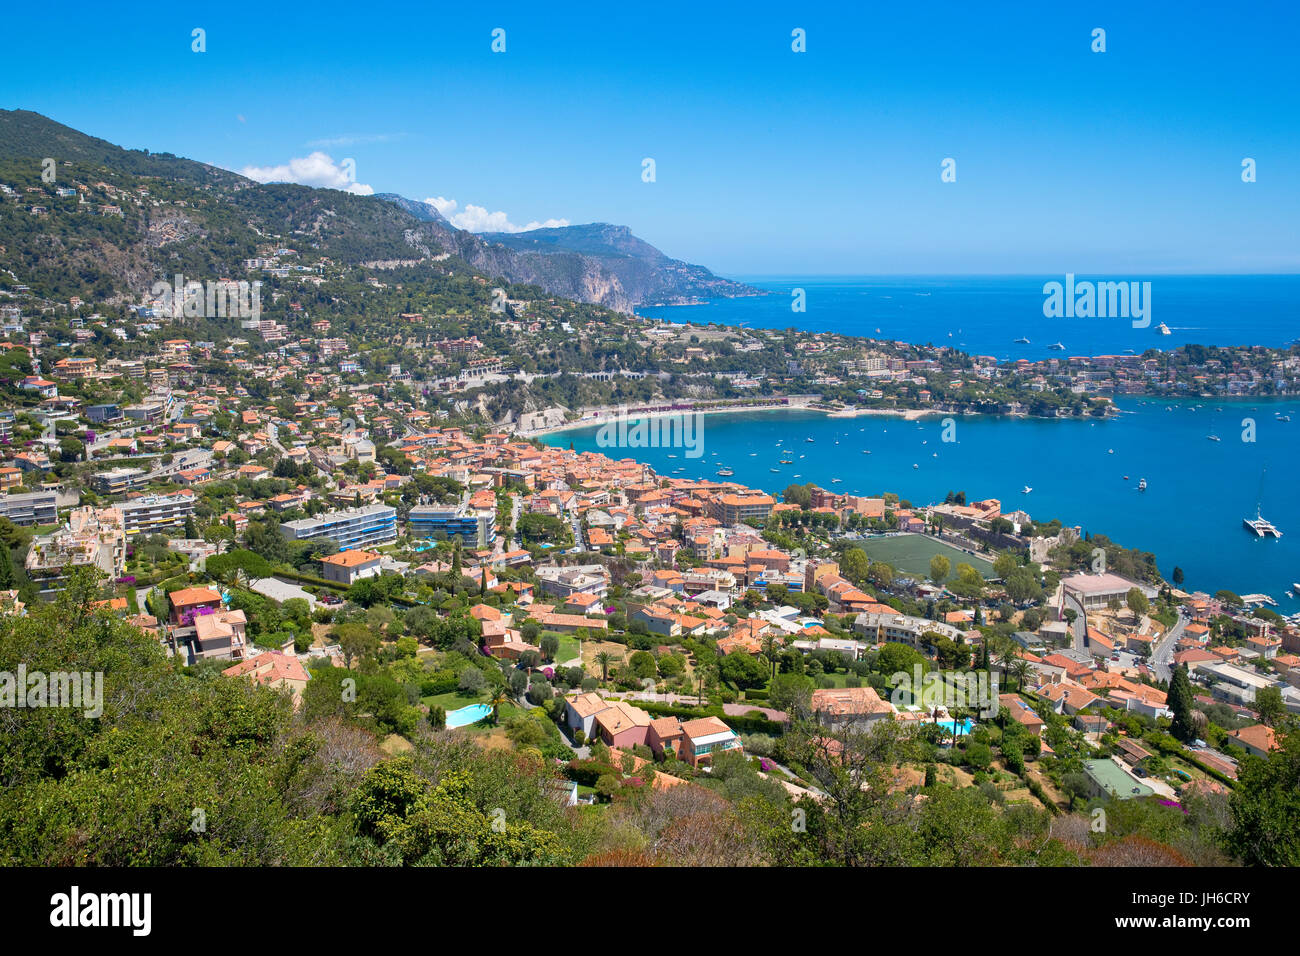 Panoramic view of Villefranche-sur-Mer and Saint-Jean-Cap-Ferrat near Nice, France Stock Photo